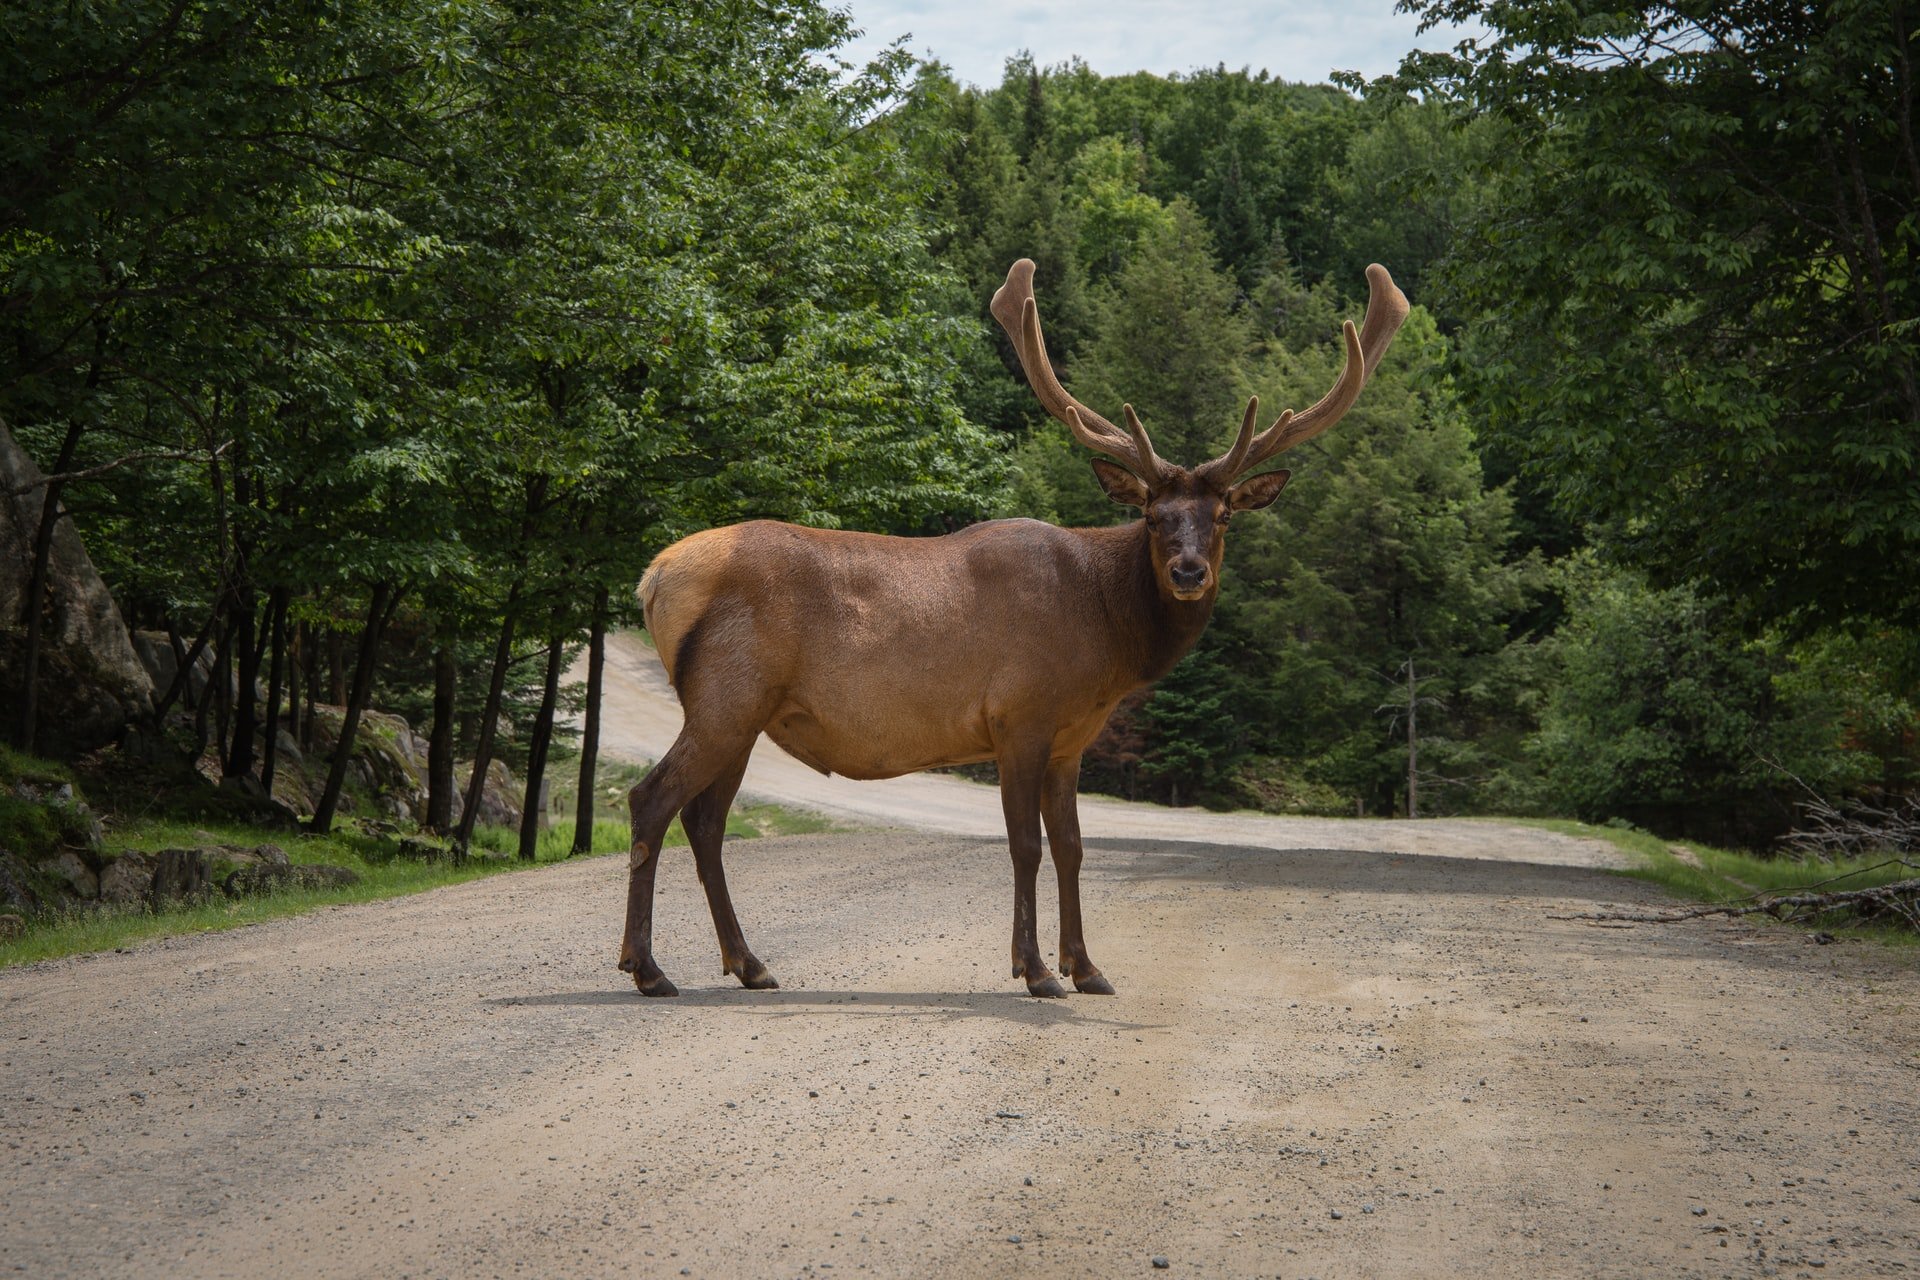 OP's parents encountered an accident involving a moose. | Source: Unsplash